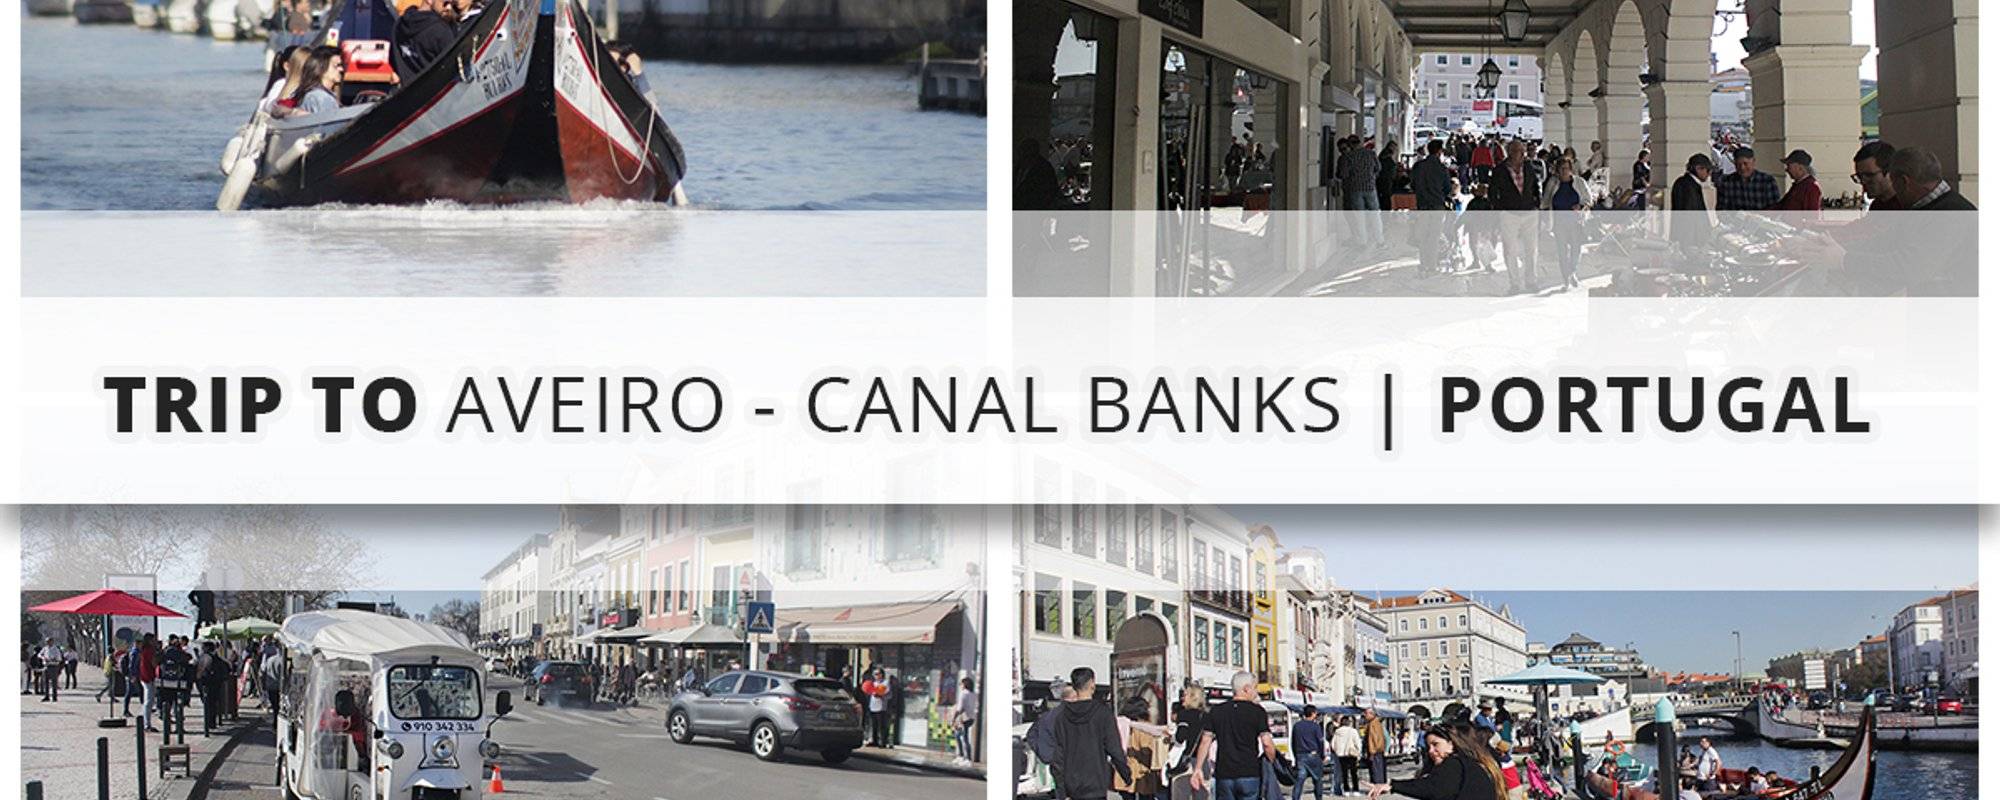 Trip to Aveiro - Canal Banks | Portugal